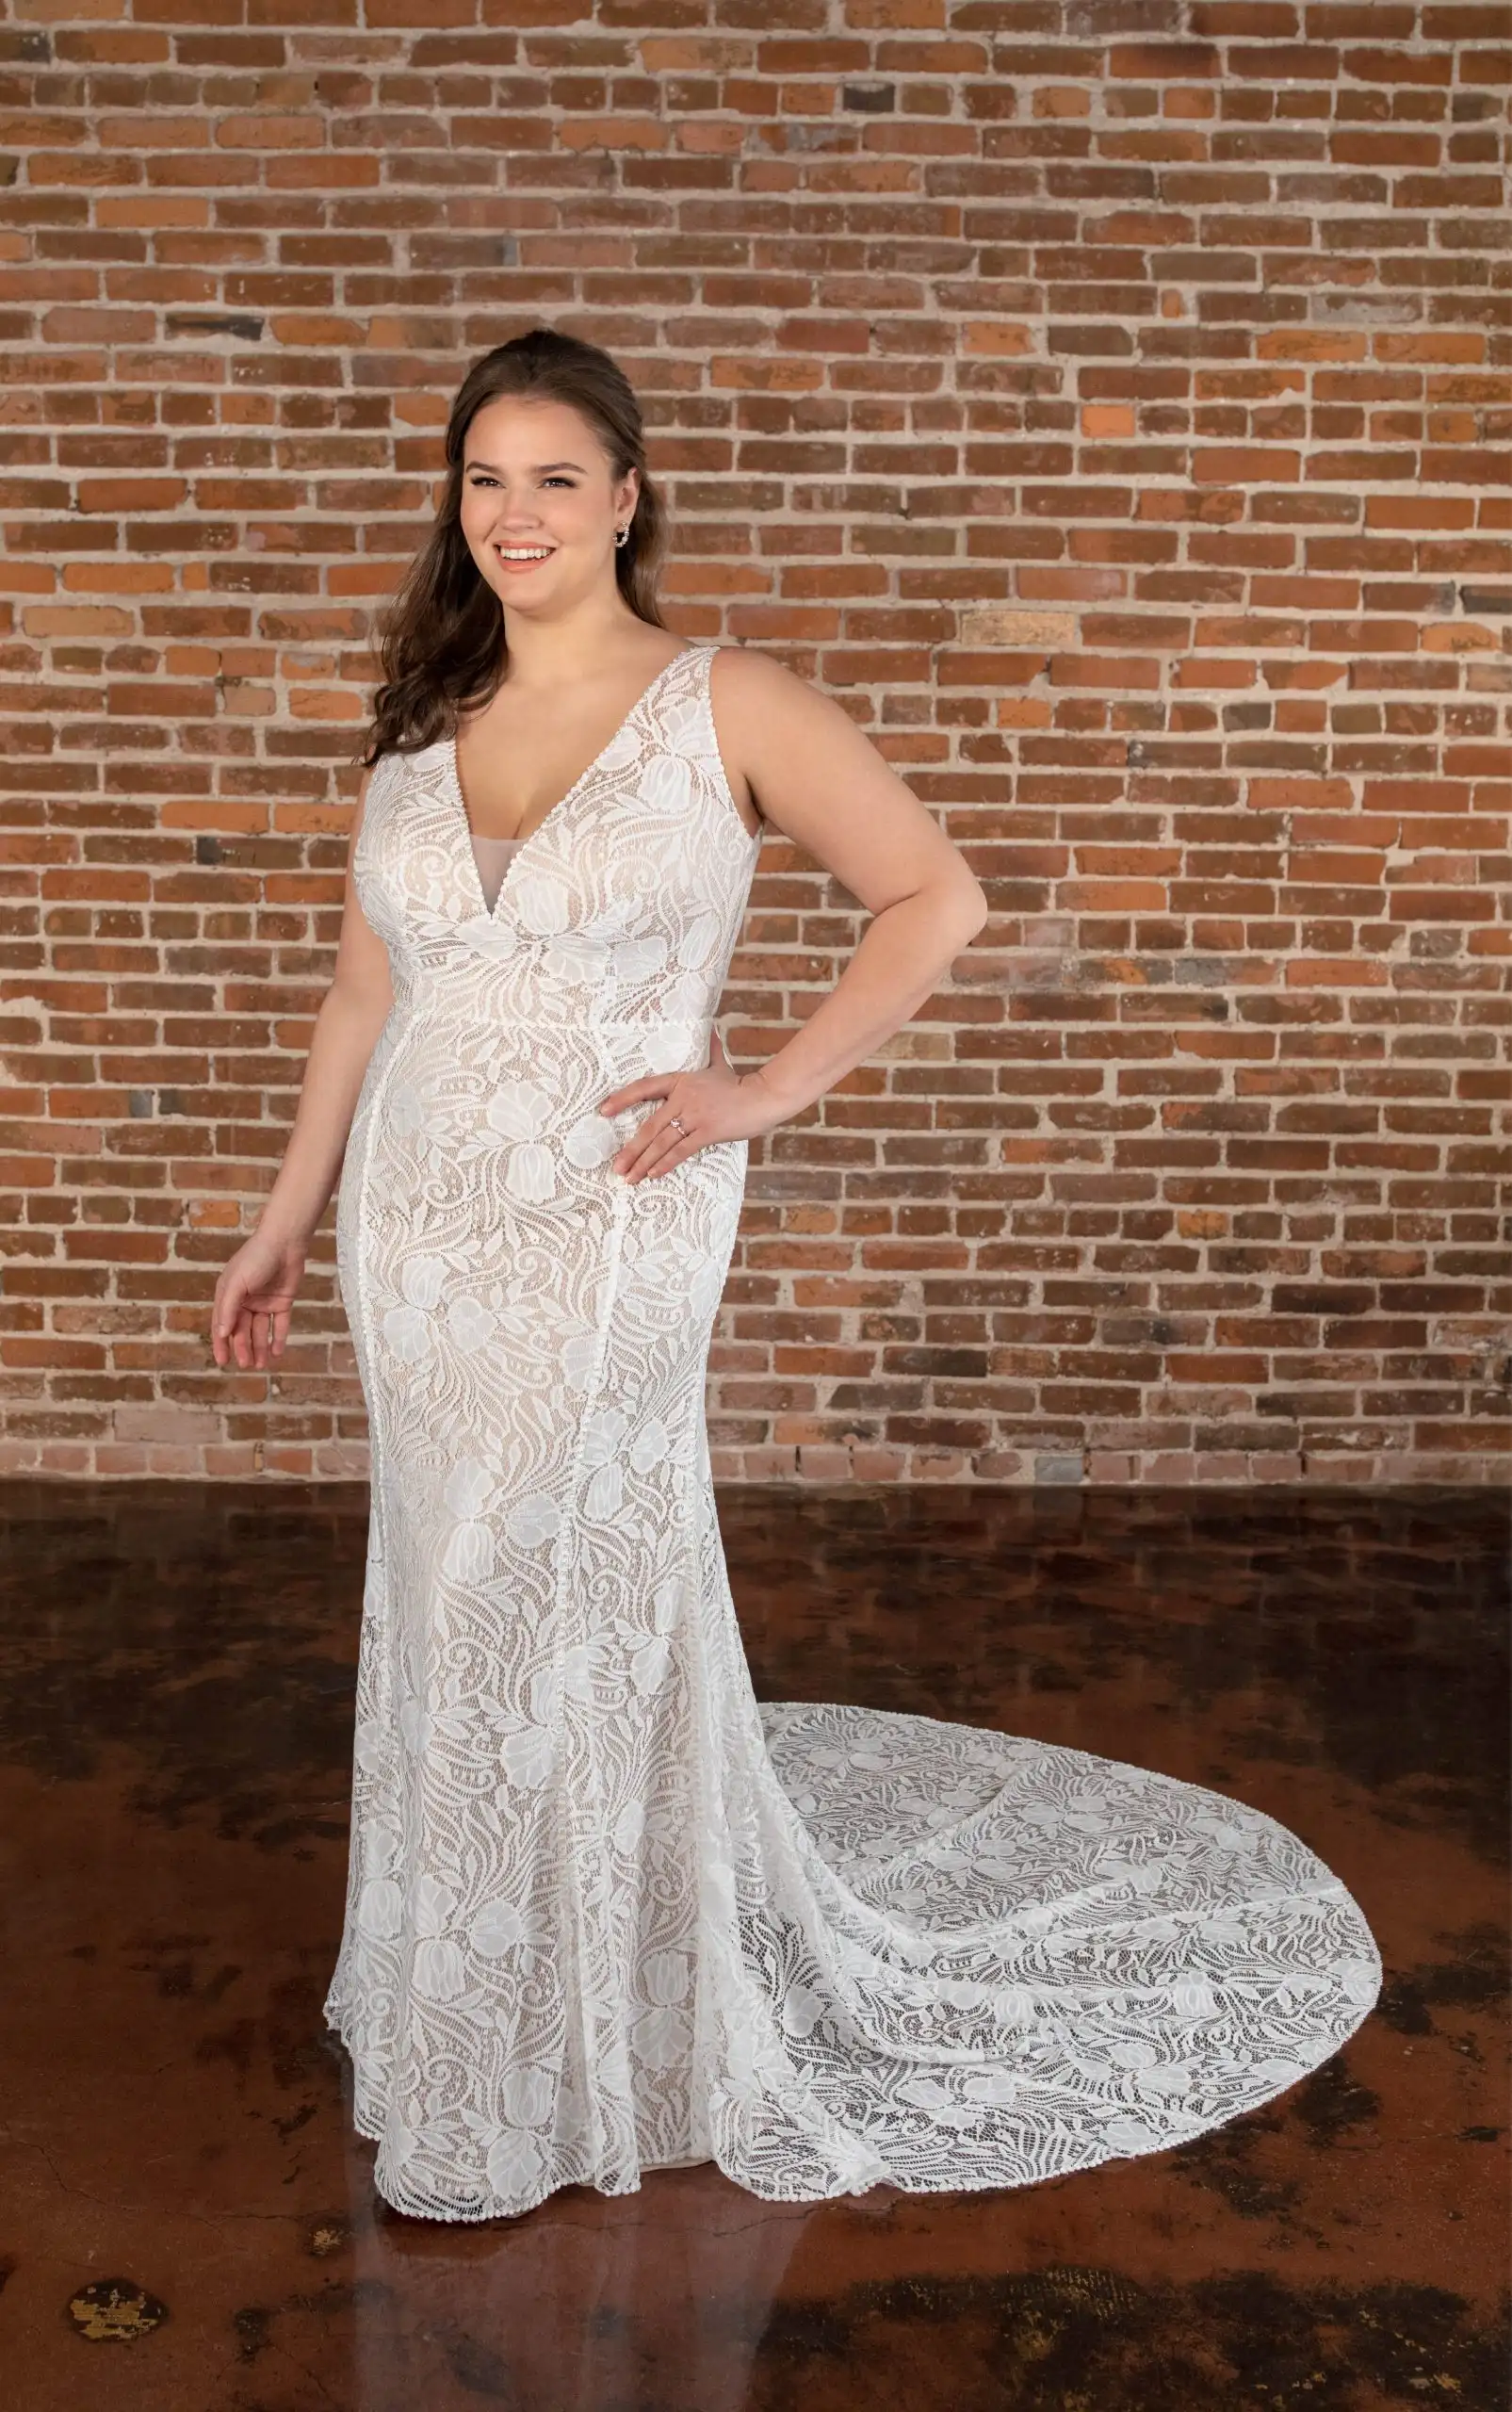 Modern Long Sleeve Plus Size Lace Column Wedding Dress with Low Back Detail, D3791+, by Essense of Australia